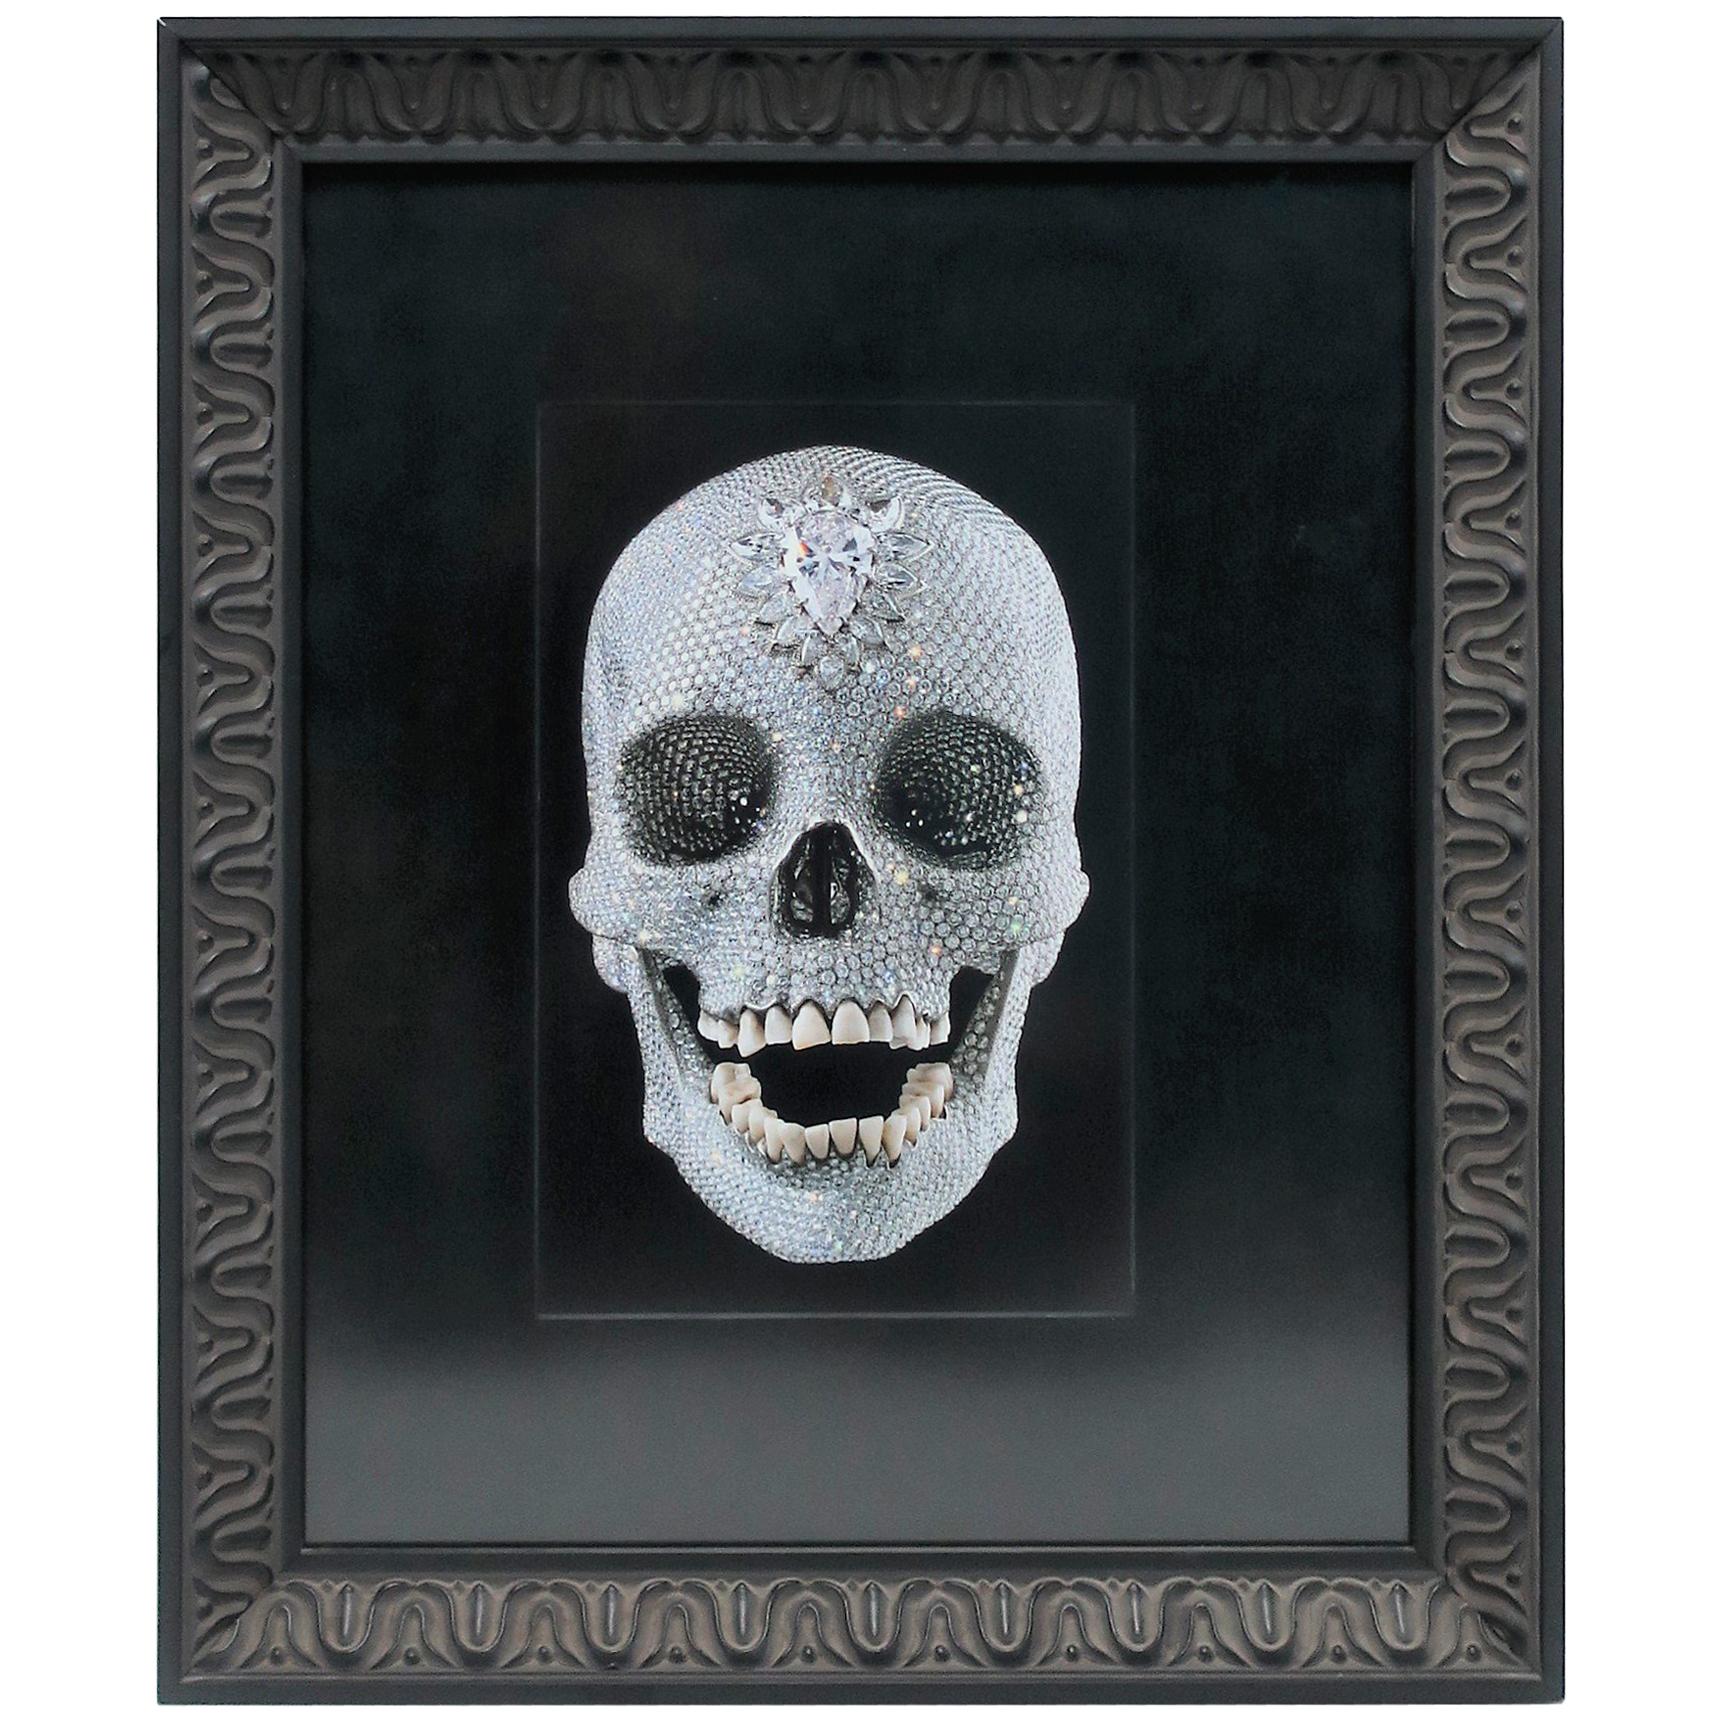 Diamond Skull, For The Love of God, by Damien Hirst, with Black Picture Frame